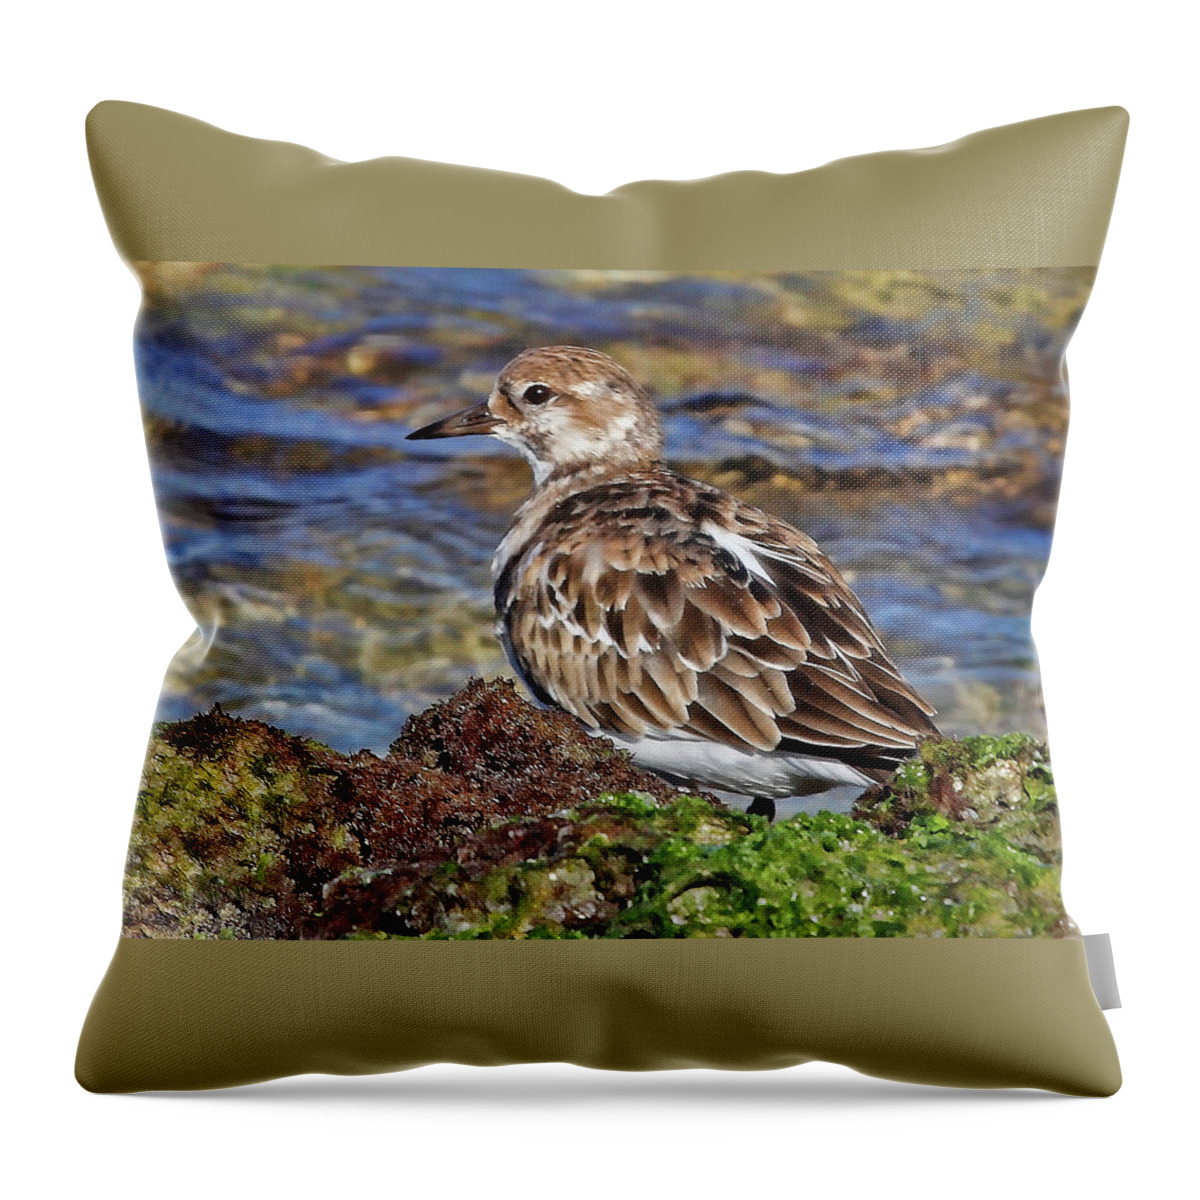 Ruddy Turnstone Throw Pillow featuring the photograph Ruddy By The Sea by HH Photography of Florida